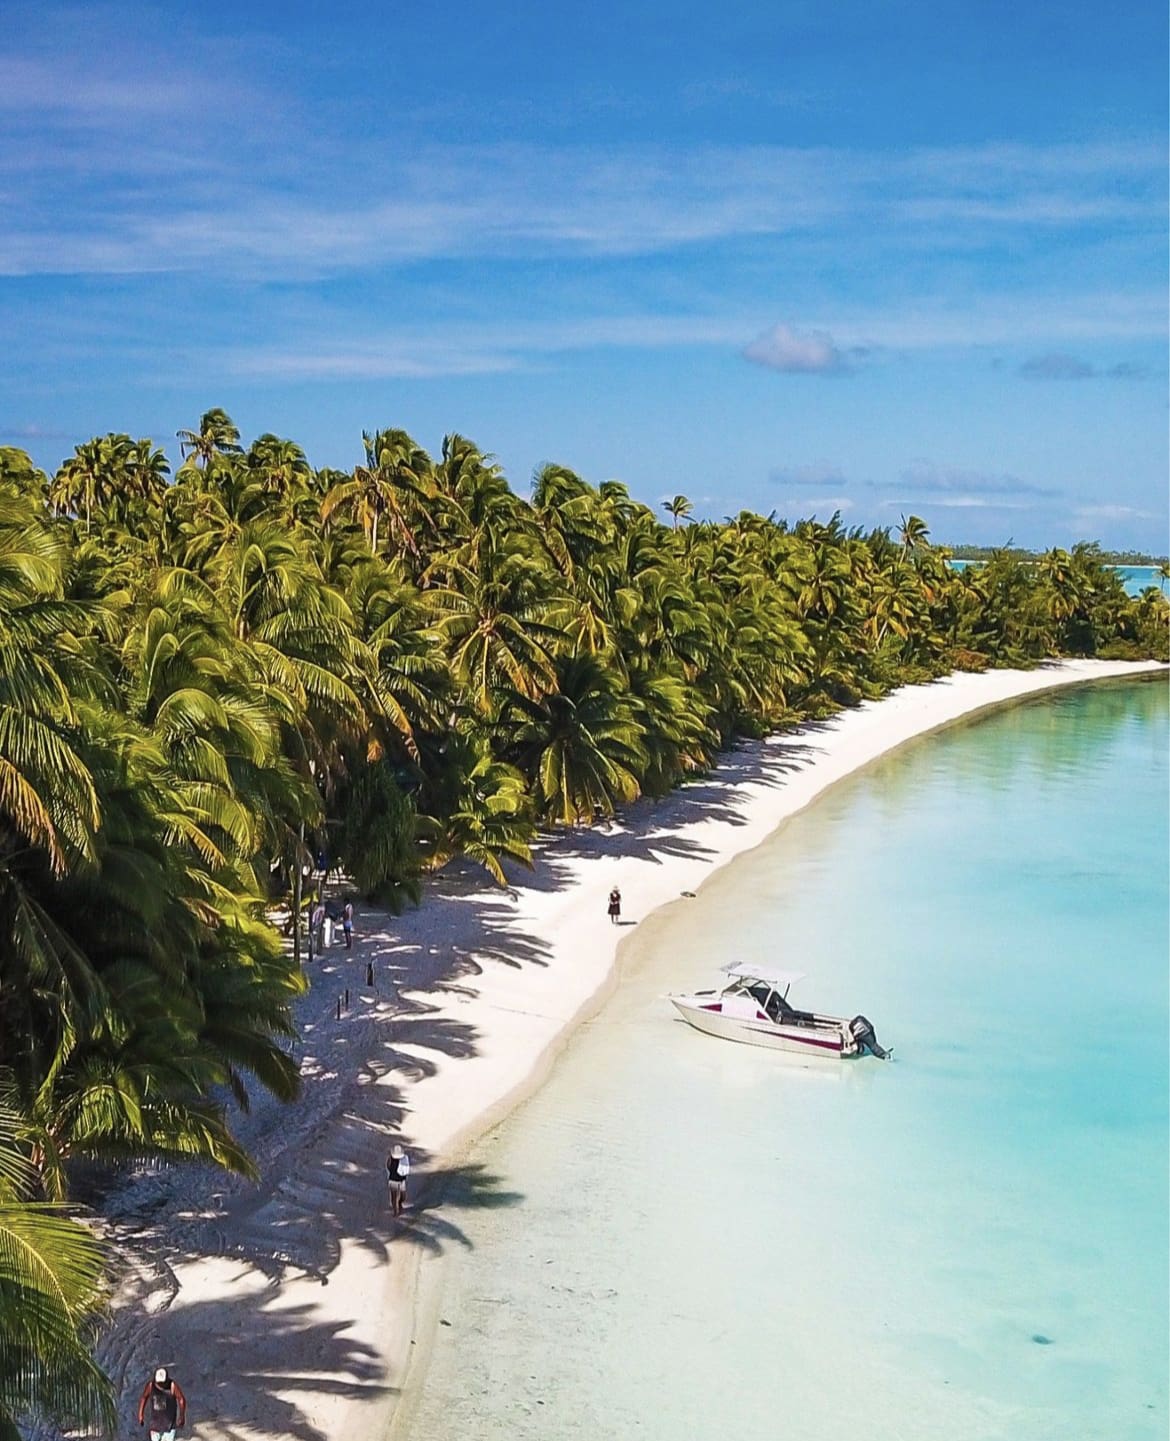 Cook Islands - A slice of paradise